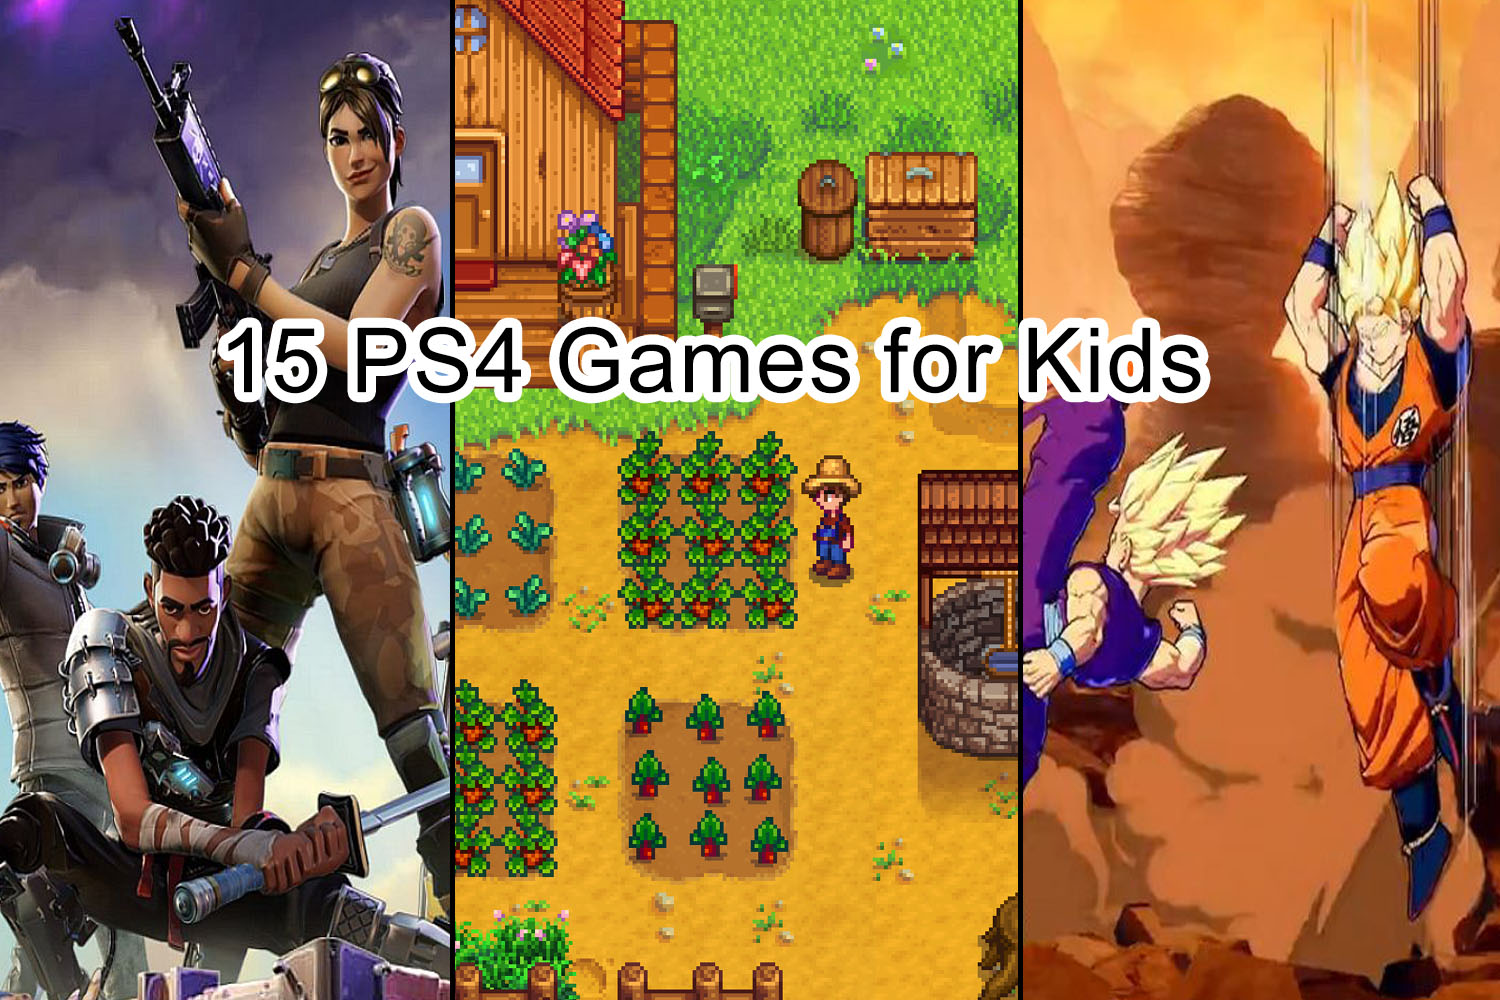 15 best and fun PS4 Games for Kids in 2018